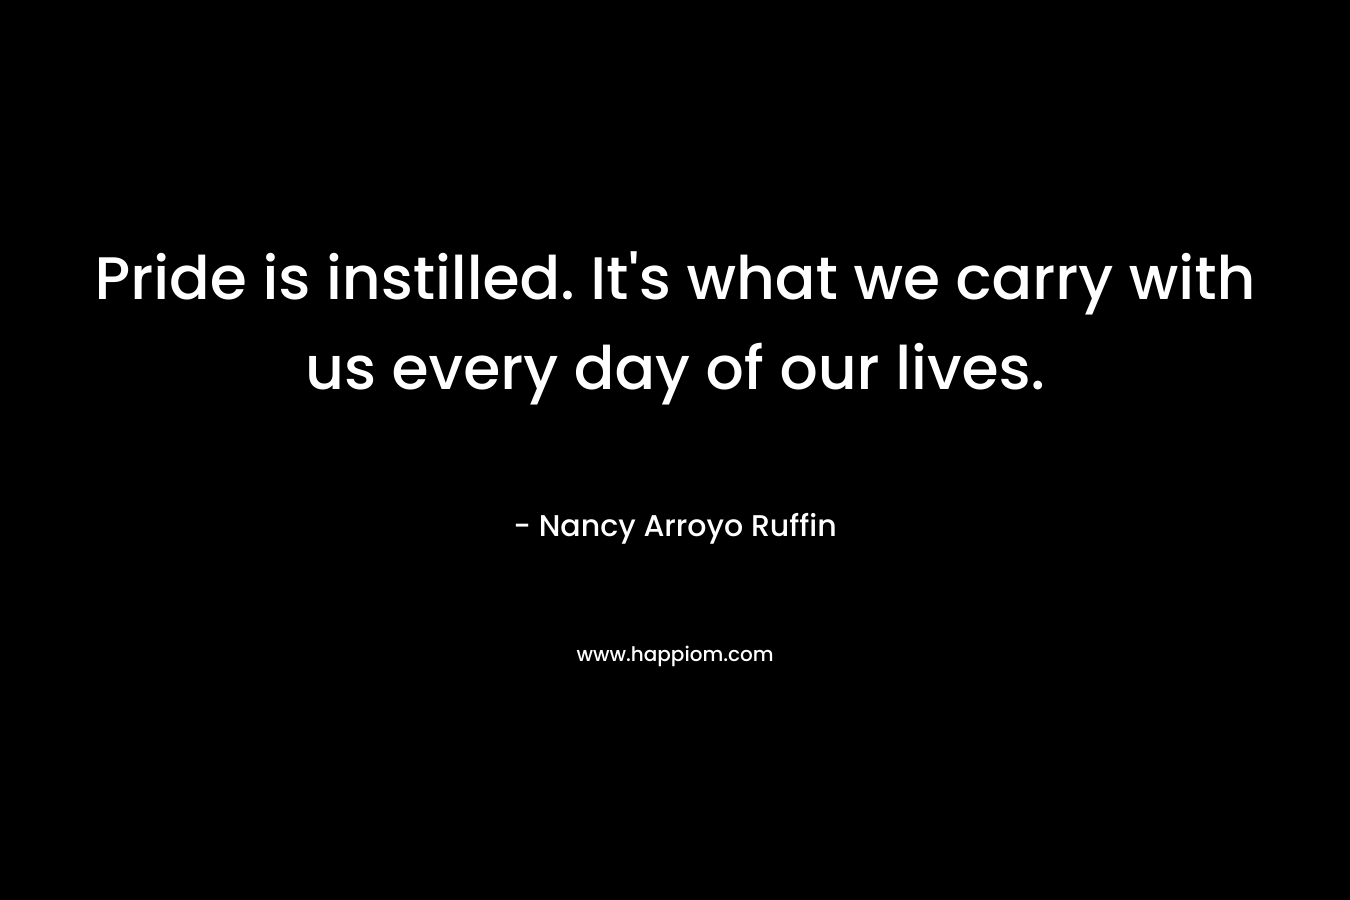 Pride is instilled. It’s what we carry with us every day of our lives. – Nancy Arroyo Ruffin